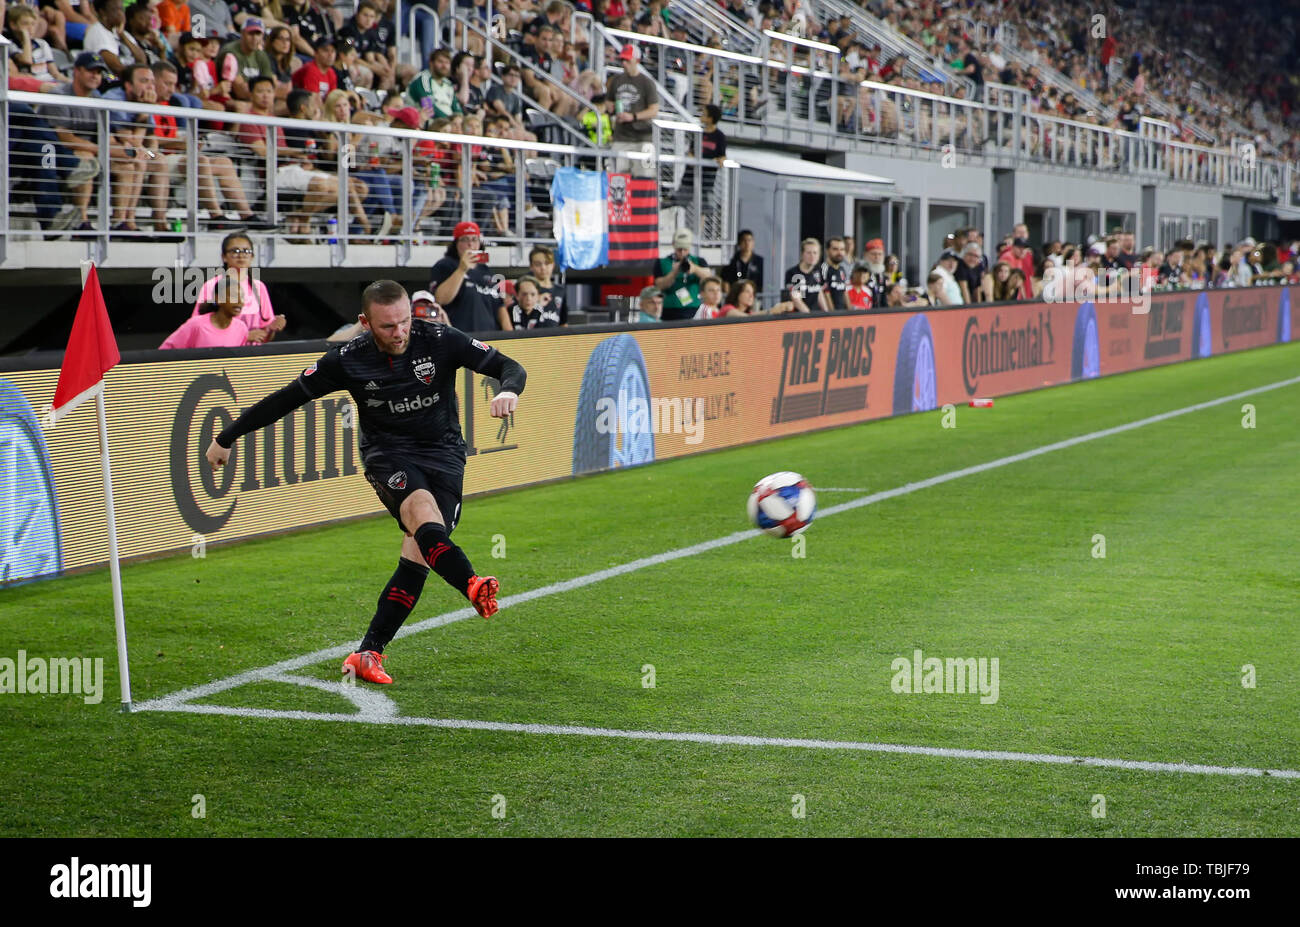 Washington DC, USA. 1st June, 2019. D.C. United Forward (9) Wayne Rooney takes a corner kick during an MLS soccer match between the D.C. United and the San Jose Earthquakes at Audi Field in Washington DC. Justin Cooper/CSM/Alamy Live News Stock Photo